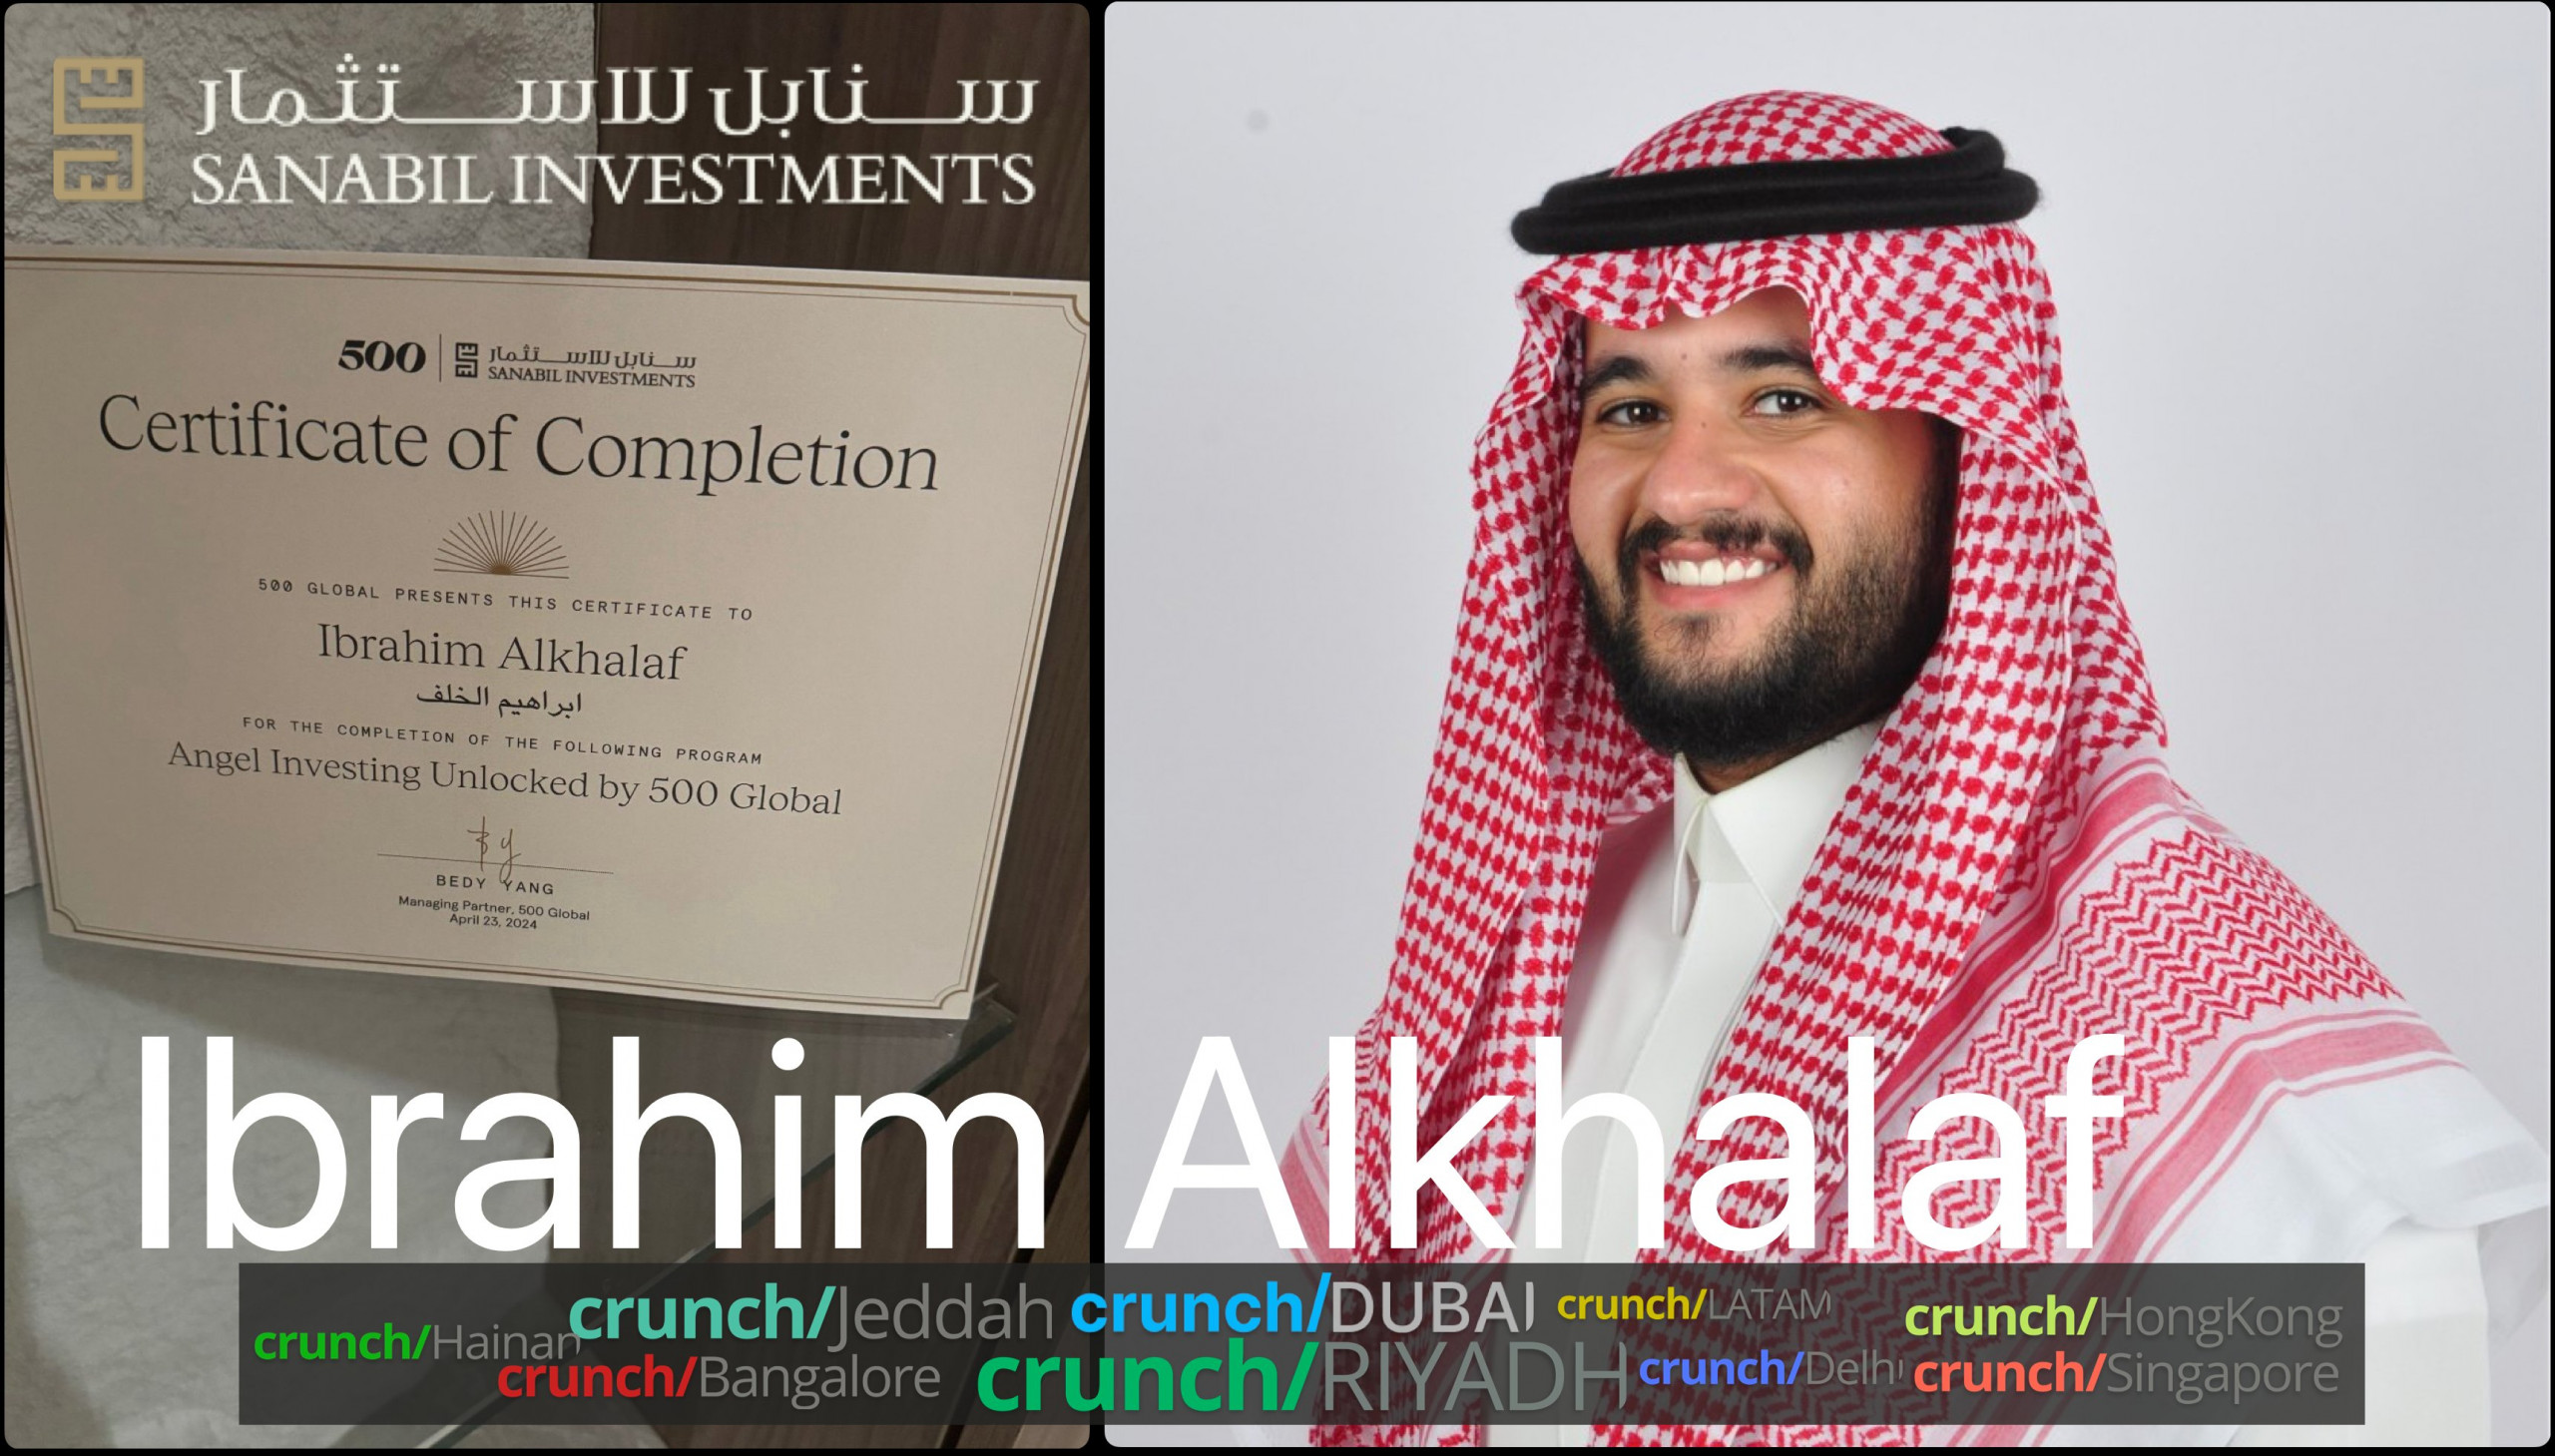 Digital certificate for Ibrahim Alkhalaf, which signifies completion of the Angel Investing Unlocked program by 500 Global in collaboration with SANABIL INVESTMENTS, dated April 23, 2024, authenticated by Bedy Yang